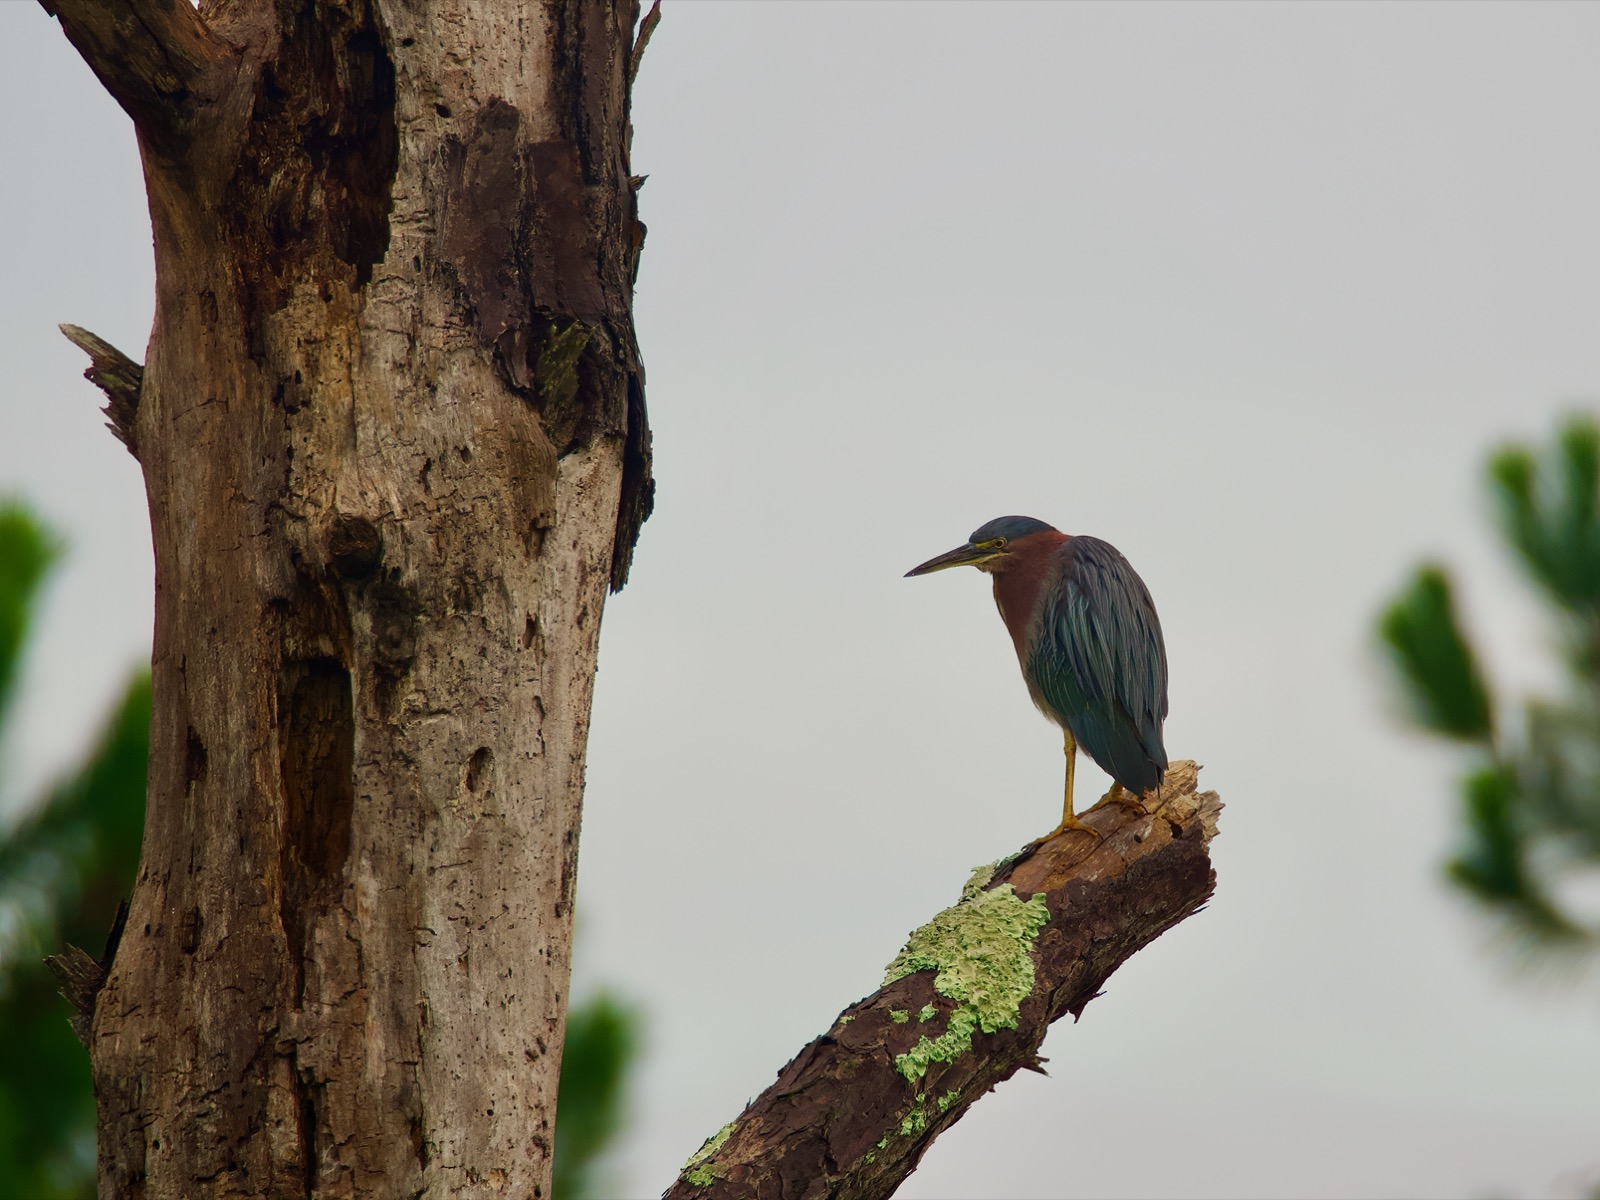 Green heron perched on the limb of a dead tree.